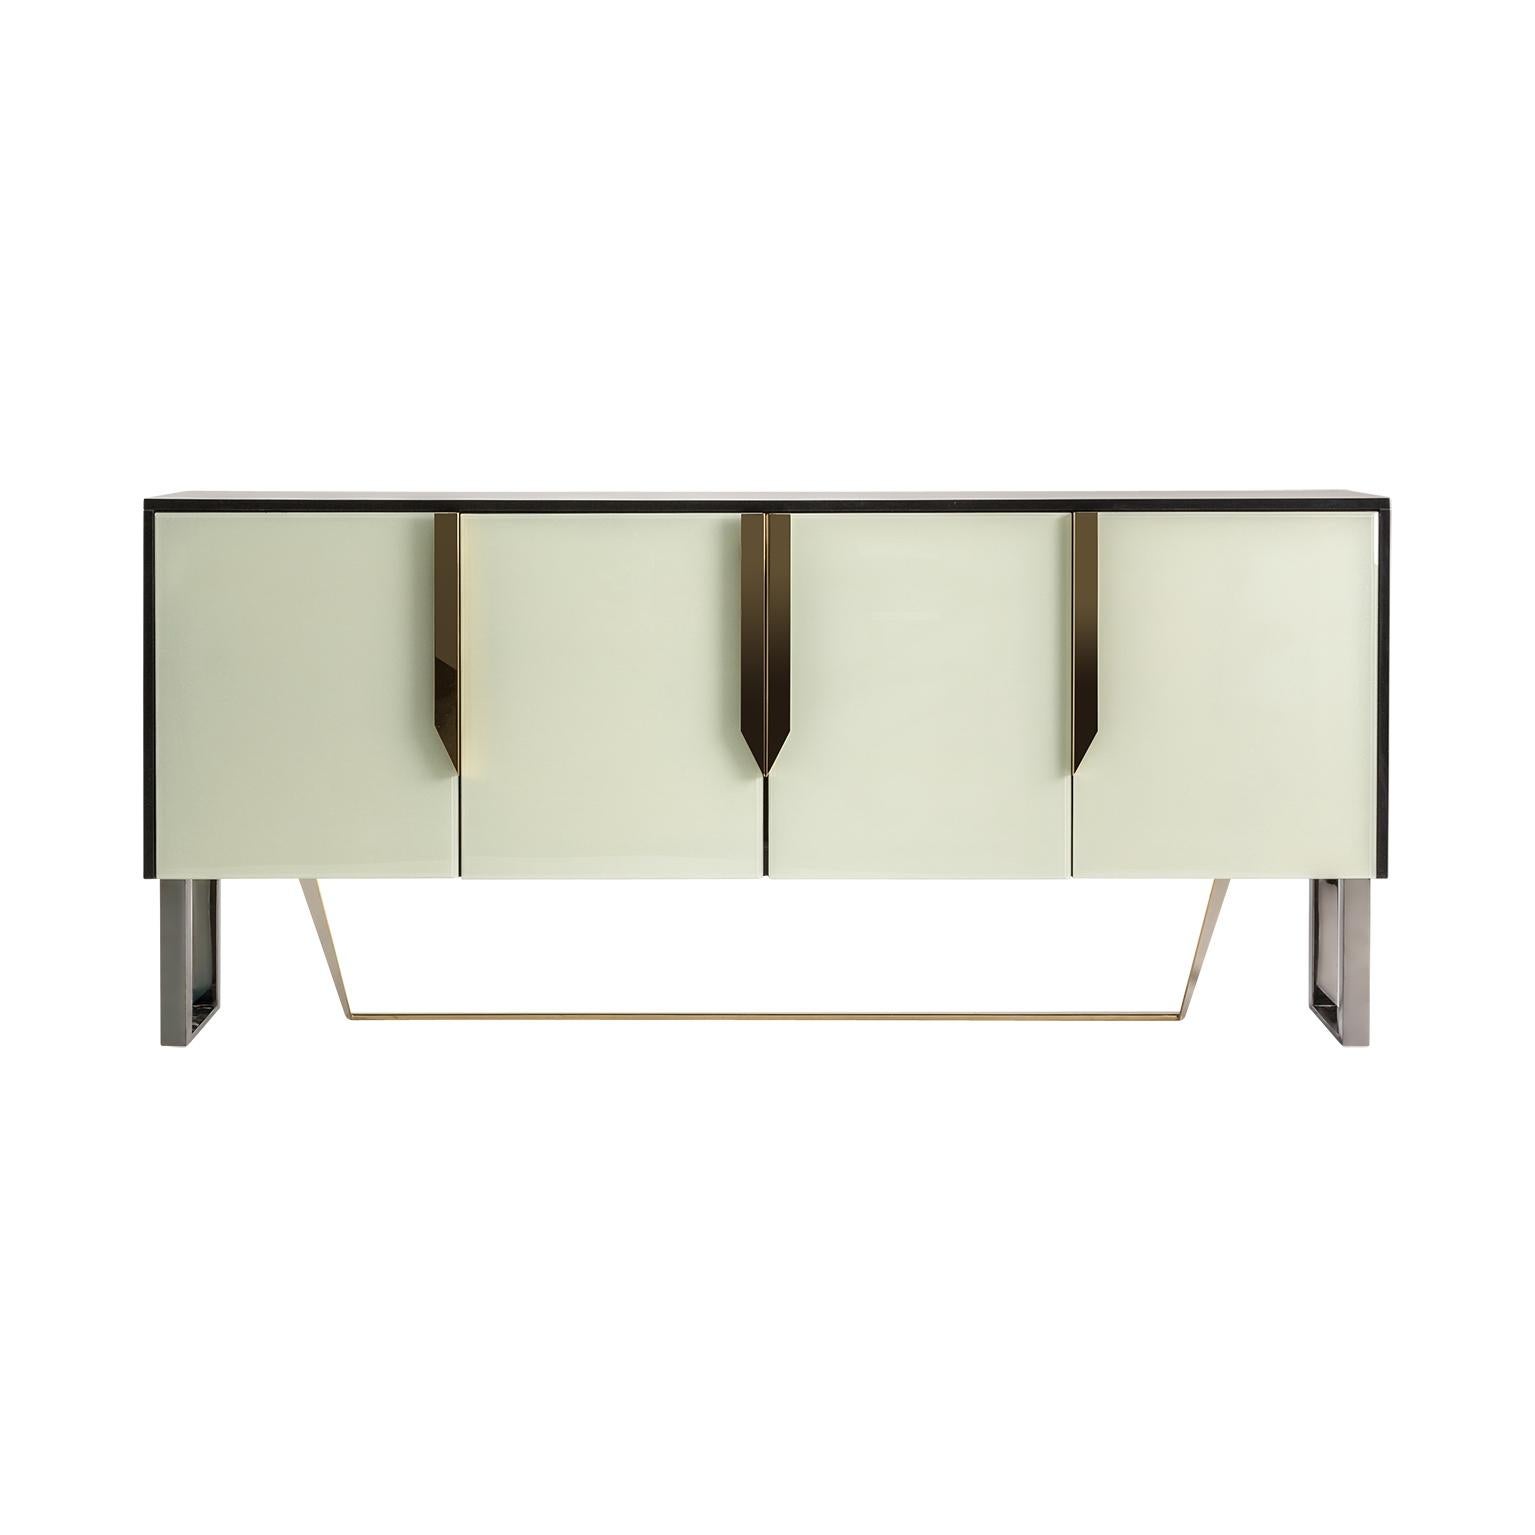 Sparkling and sophisticated sideboard with aerial chrome and gilt metal feet four colored glass and graphic panel doors adorned with gold mirrored handles. Harmonious lines, brilliant and design.